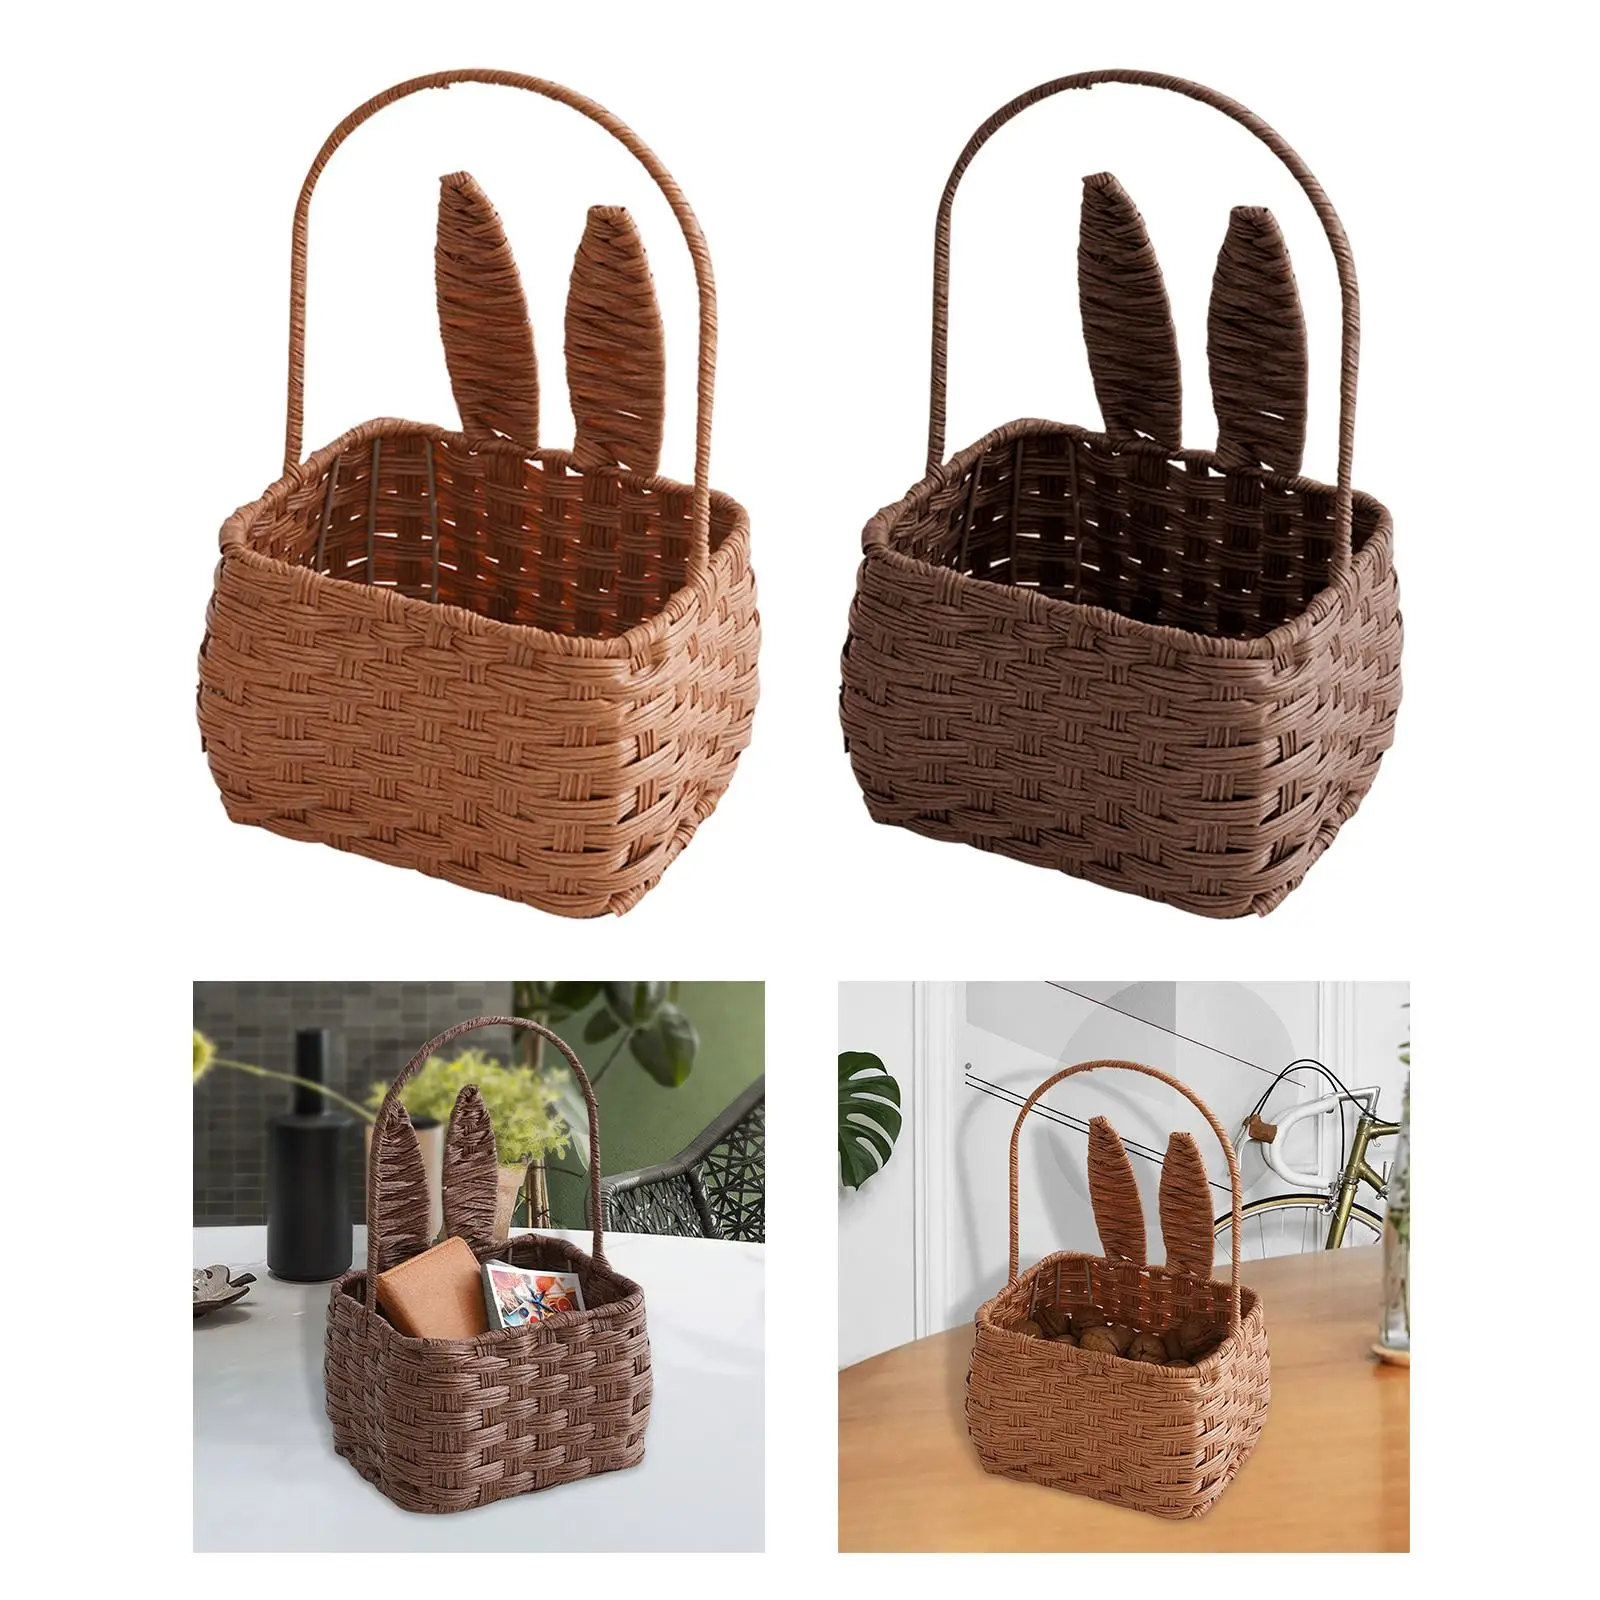 Portable Rabbit Ears Picnic Basket Handmade Best Gift Makeup Organizer with Handle Wicker Box for Camping Family Home Decoration